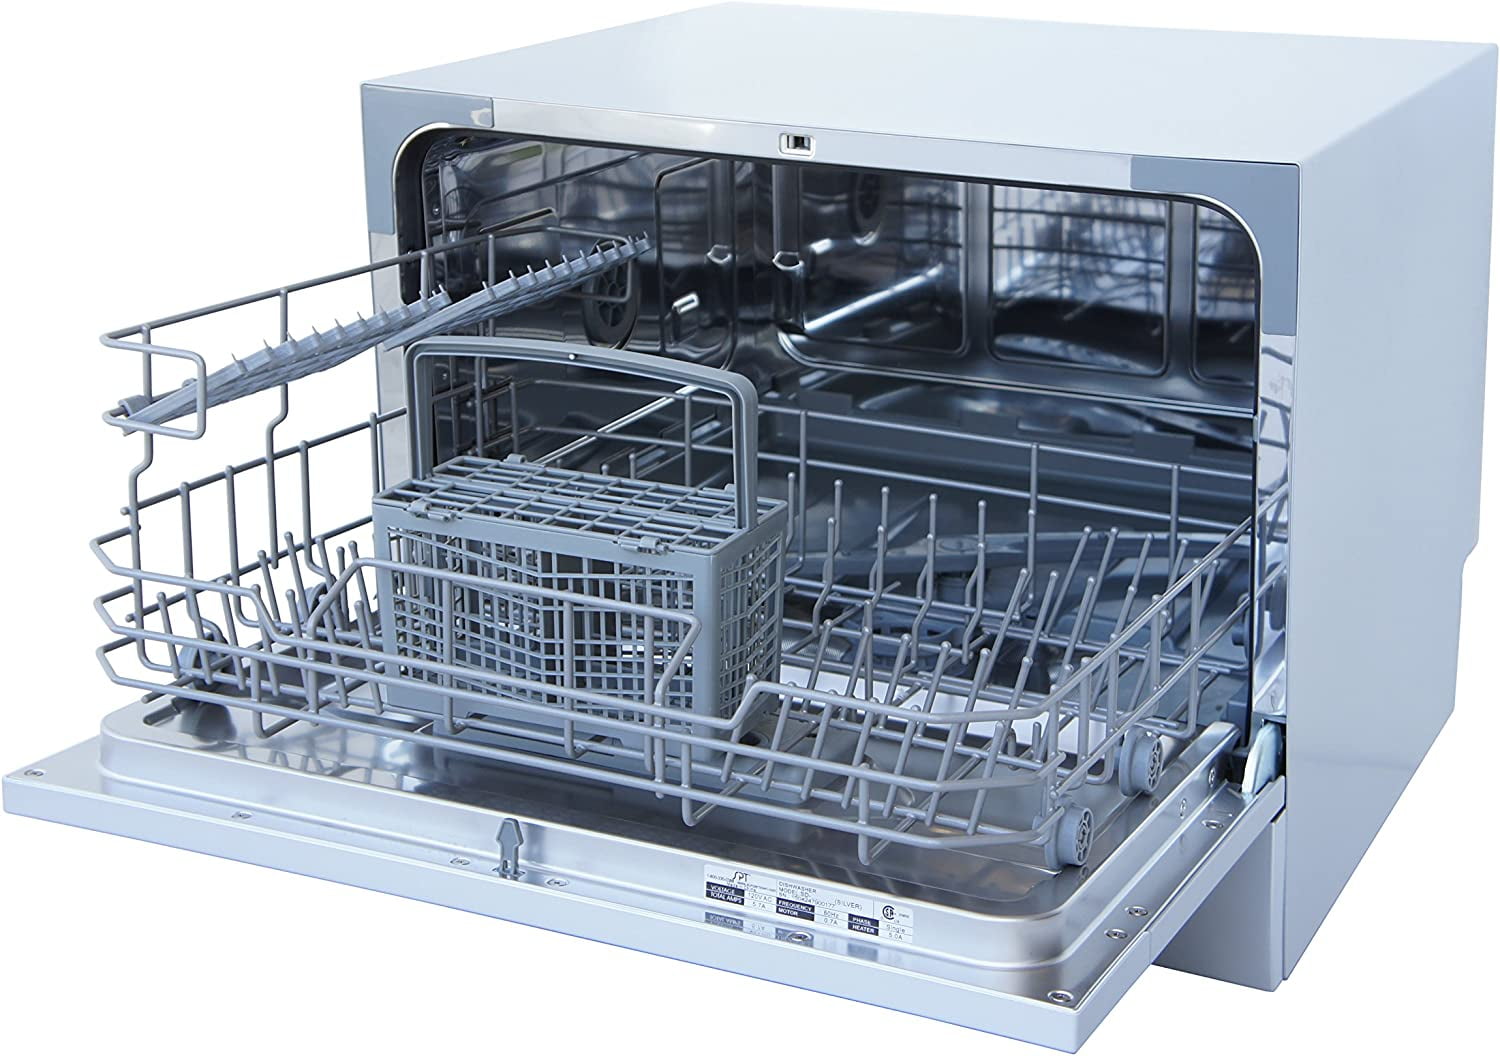 ENERGY STAR Compact Countertop Dishwasher with Delay Start - Portable Dishwasher with Stainless Steel Interior and 6 Place Settings Rack Silverware Basket for Apartment Office And Home Kitchen, White - 2